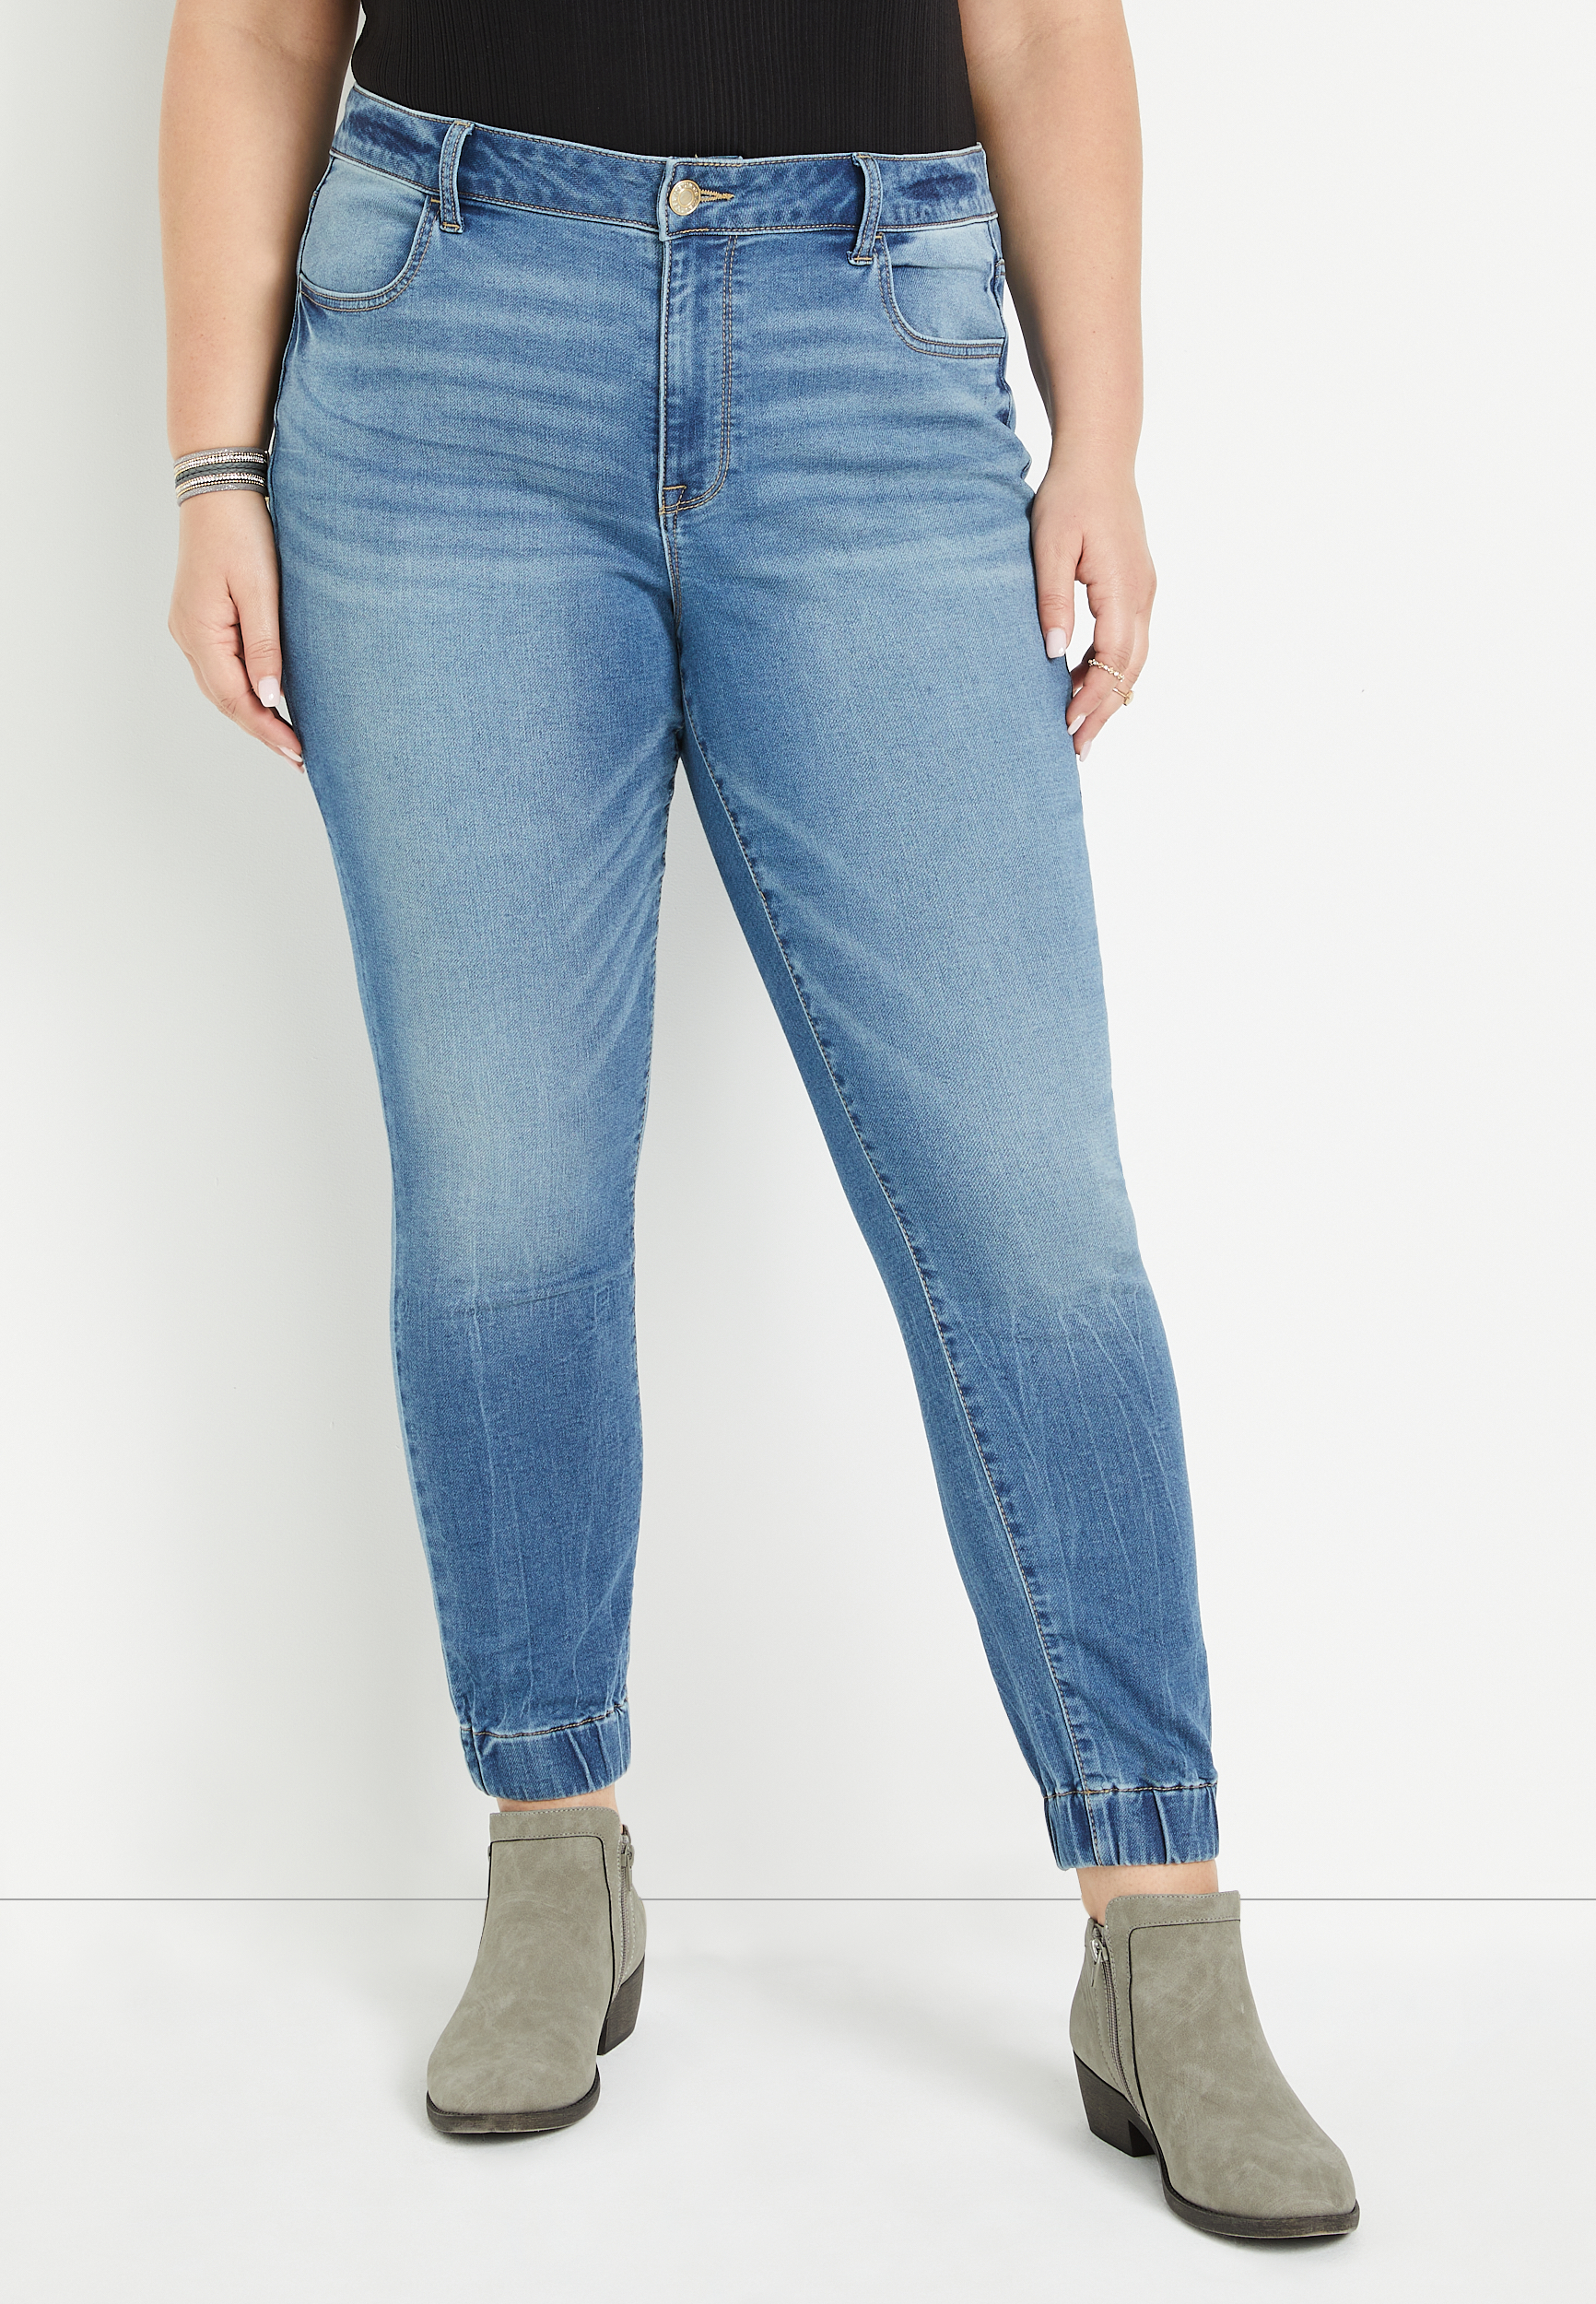 Plus Size m jeans by maurices™ Super Soft High Rise Jogger | maurices